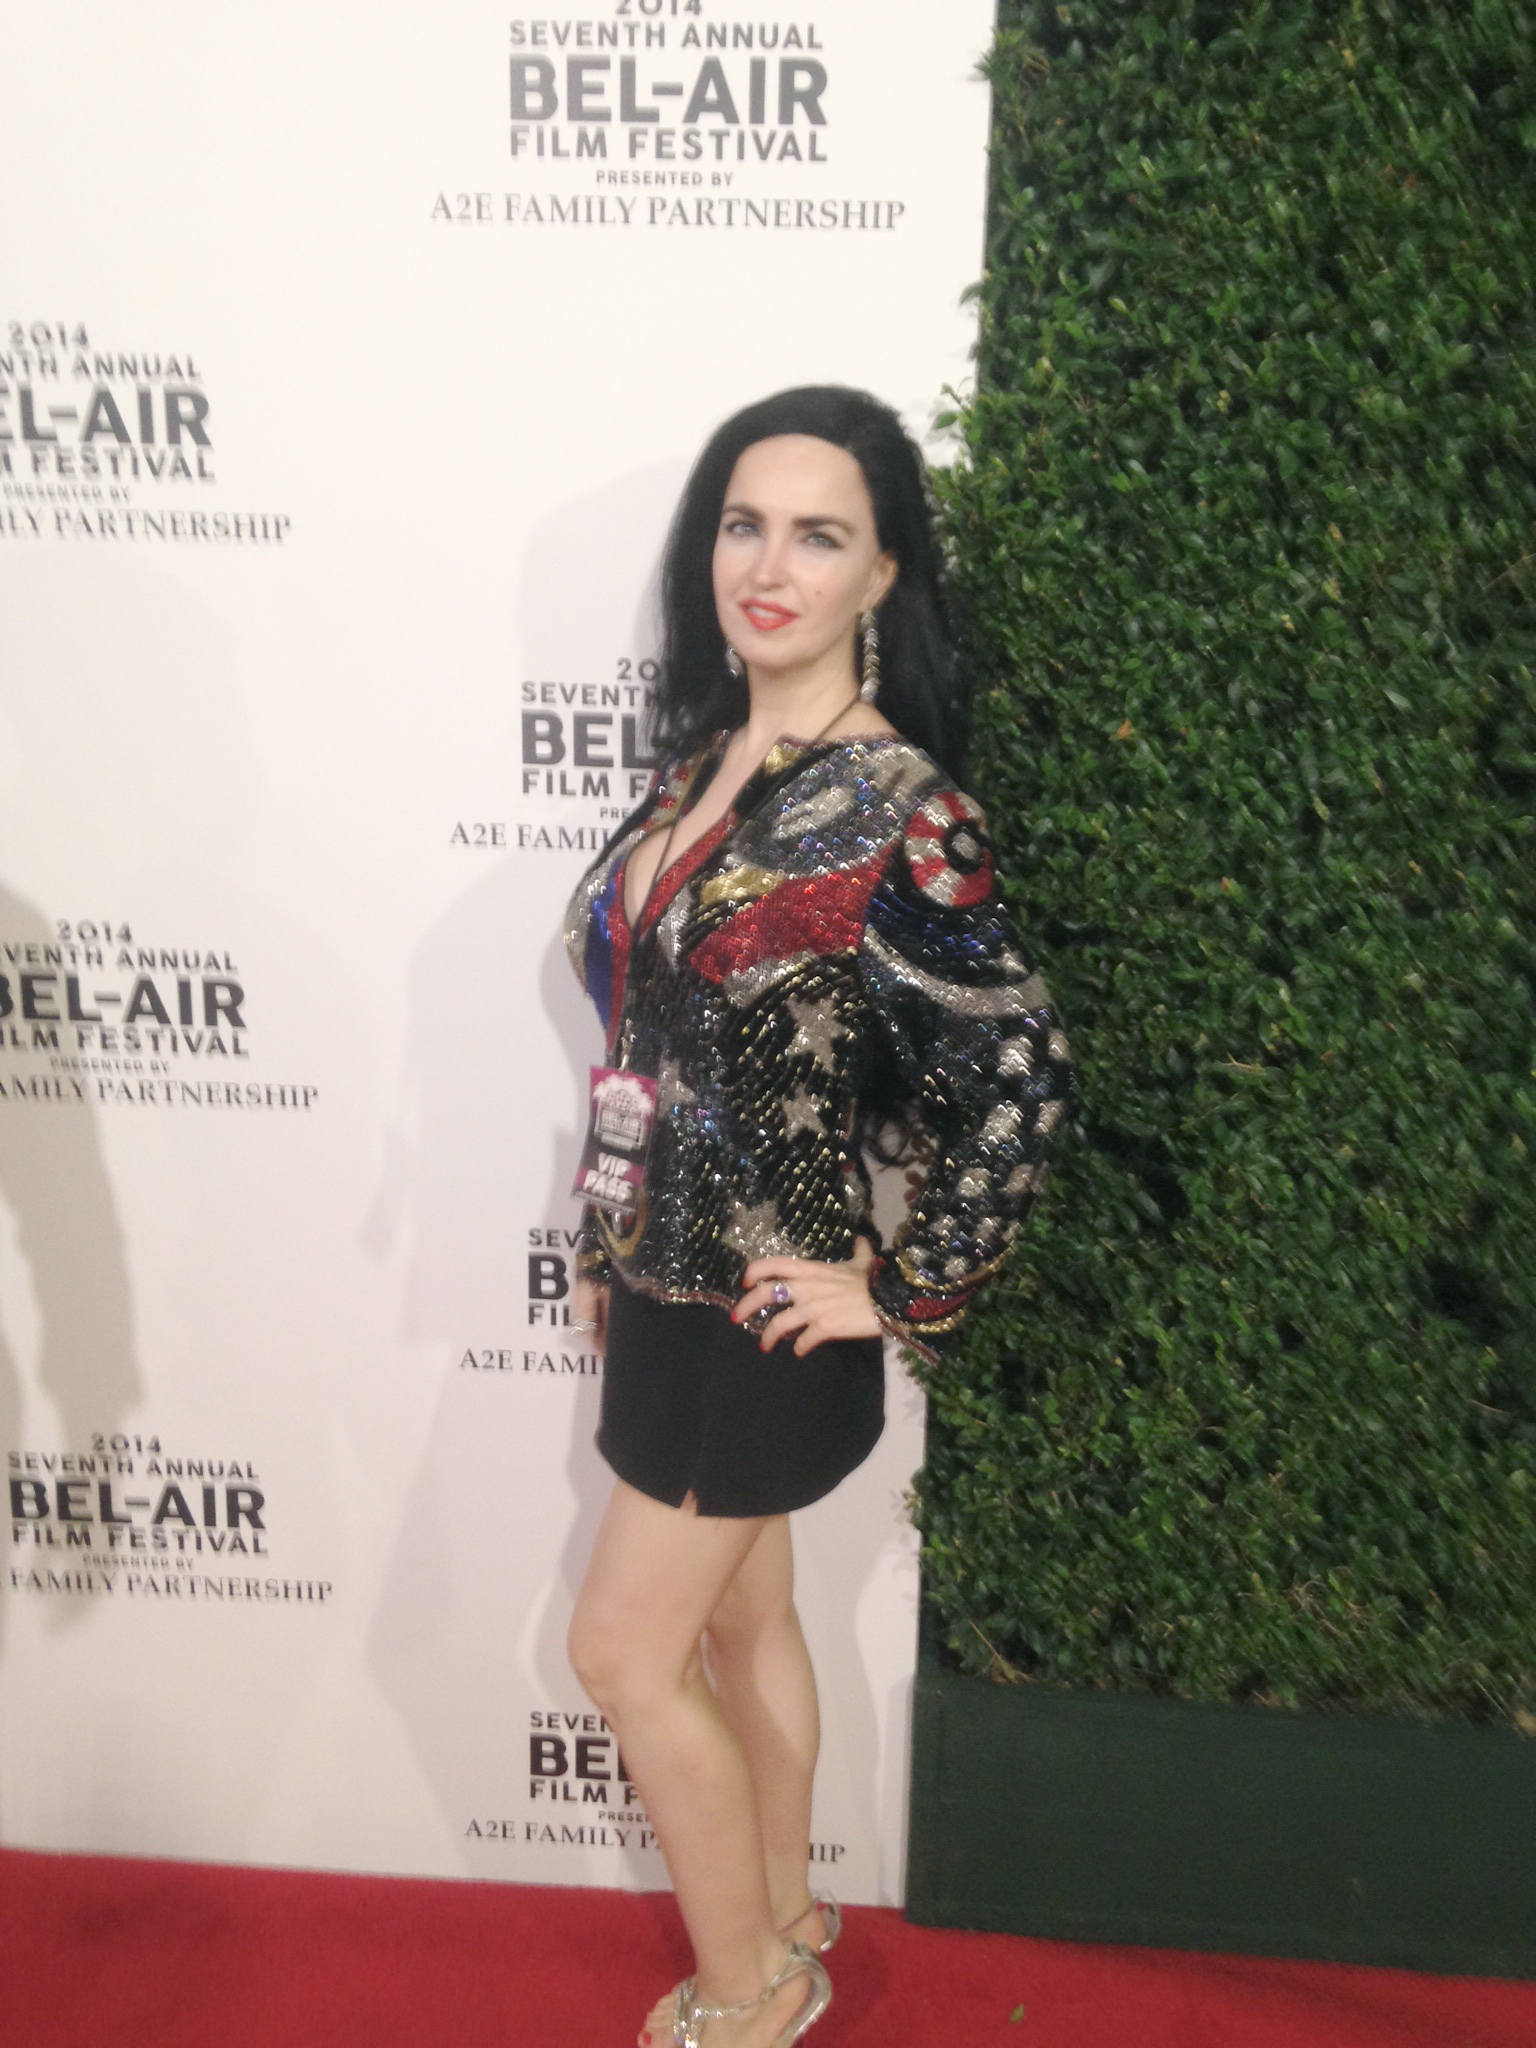 ACTRESS ALEXIS KILEY ON THE RED CARPET FOR THE OPENING OF THE 2014 SEVENTH ANNUAL BEL AIR FILM FESTIVAL. SABAN THEATRE- BEVERLY HILLS, CALIFORNIA